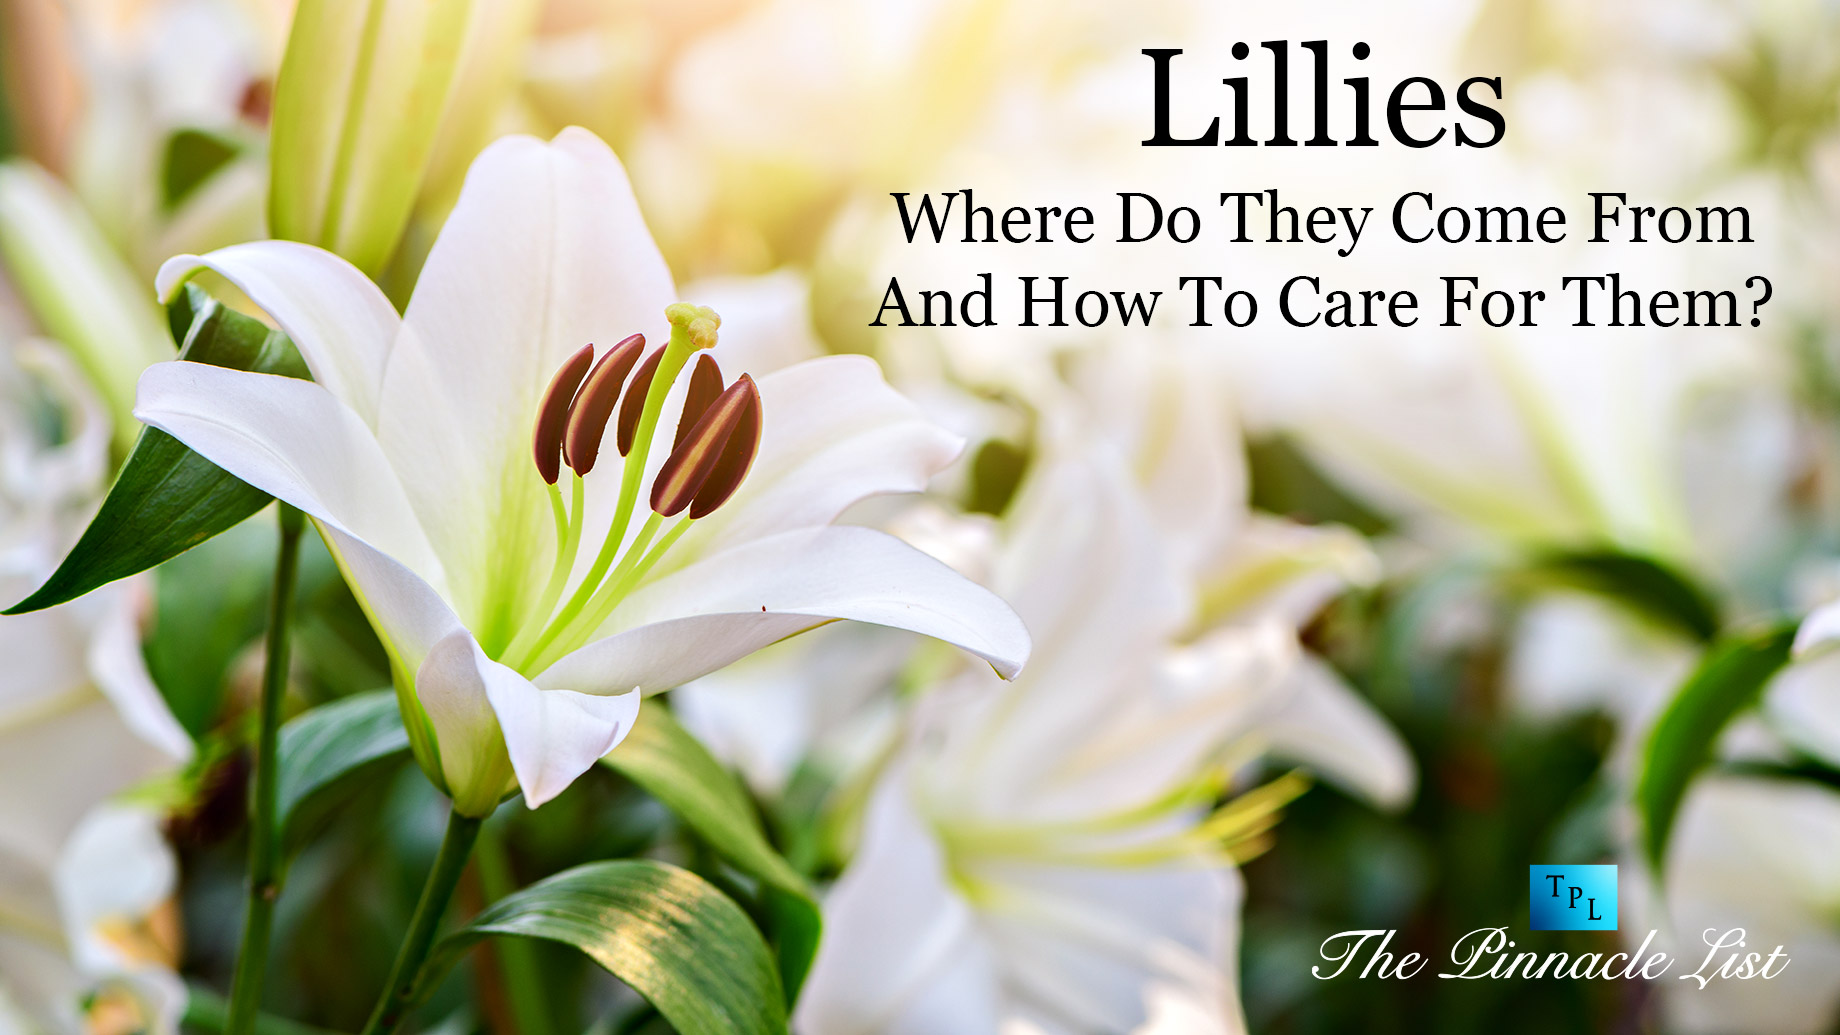 Lillies: Where Do They Come From And How To Care For Them?